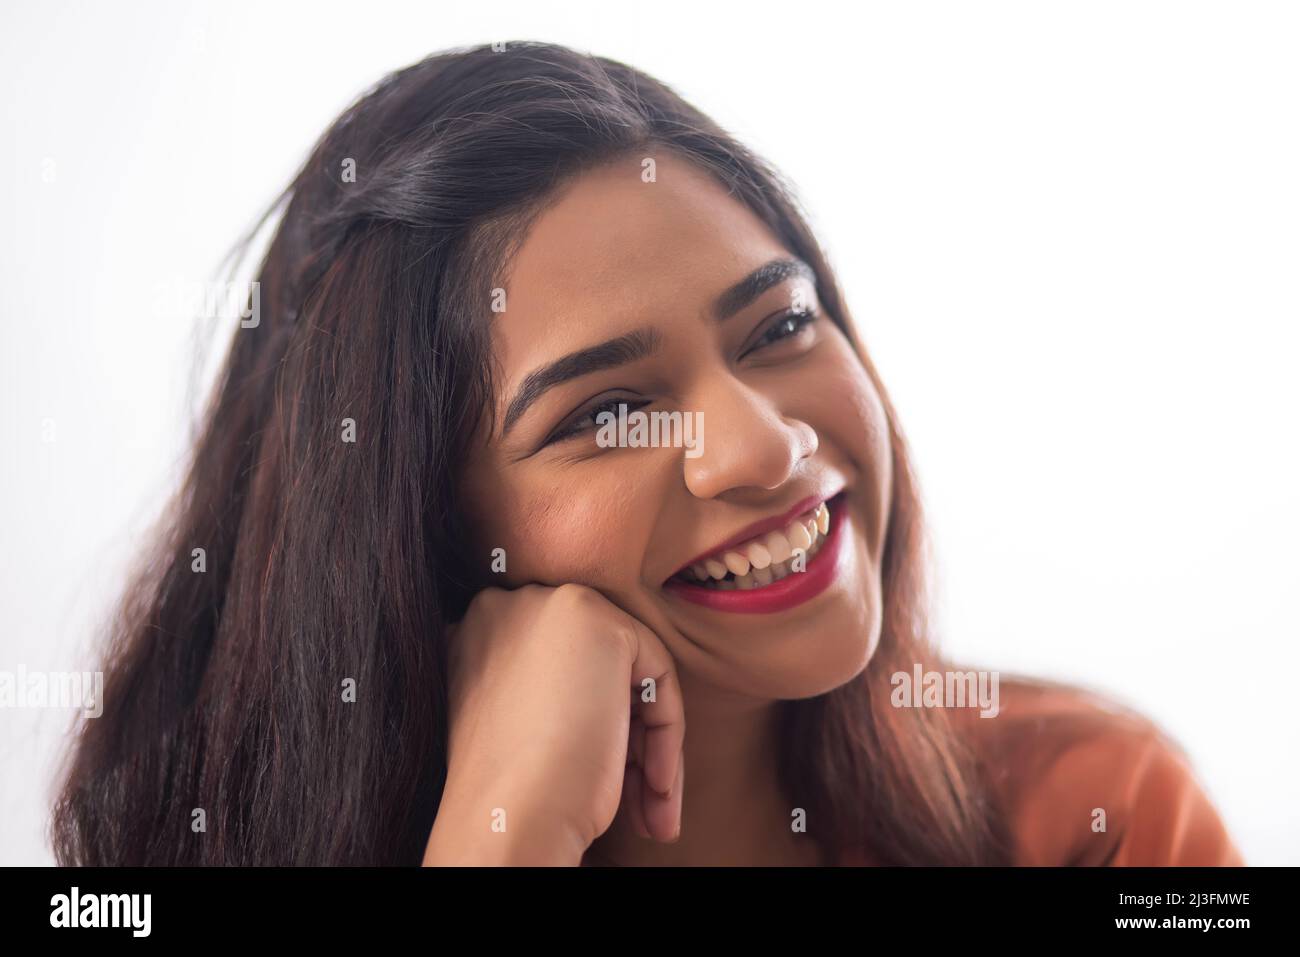 Close-up portrait of smiling woman with hand on cheek Stock Photo